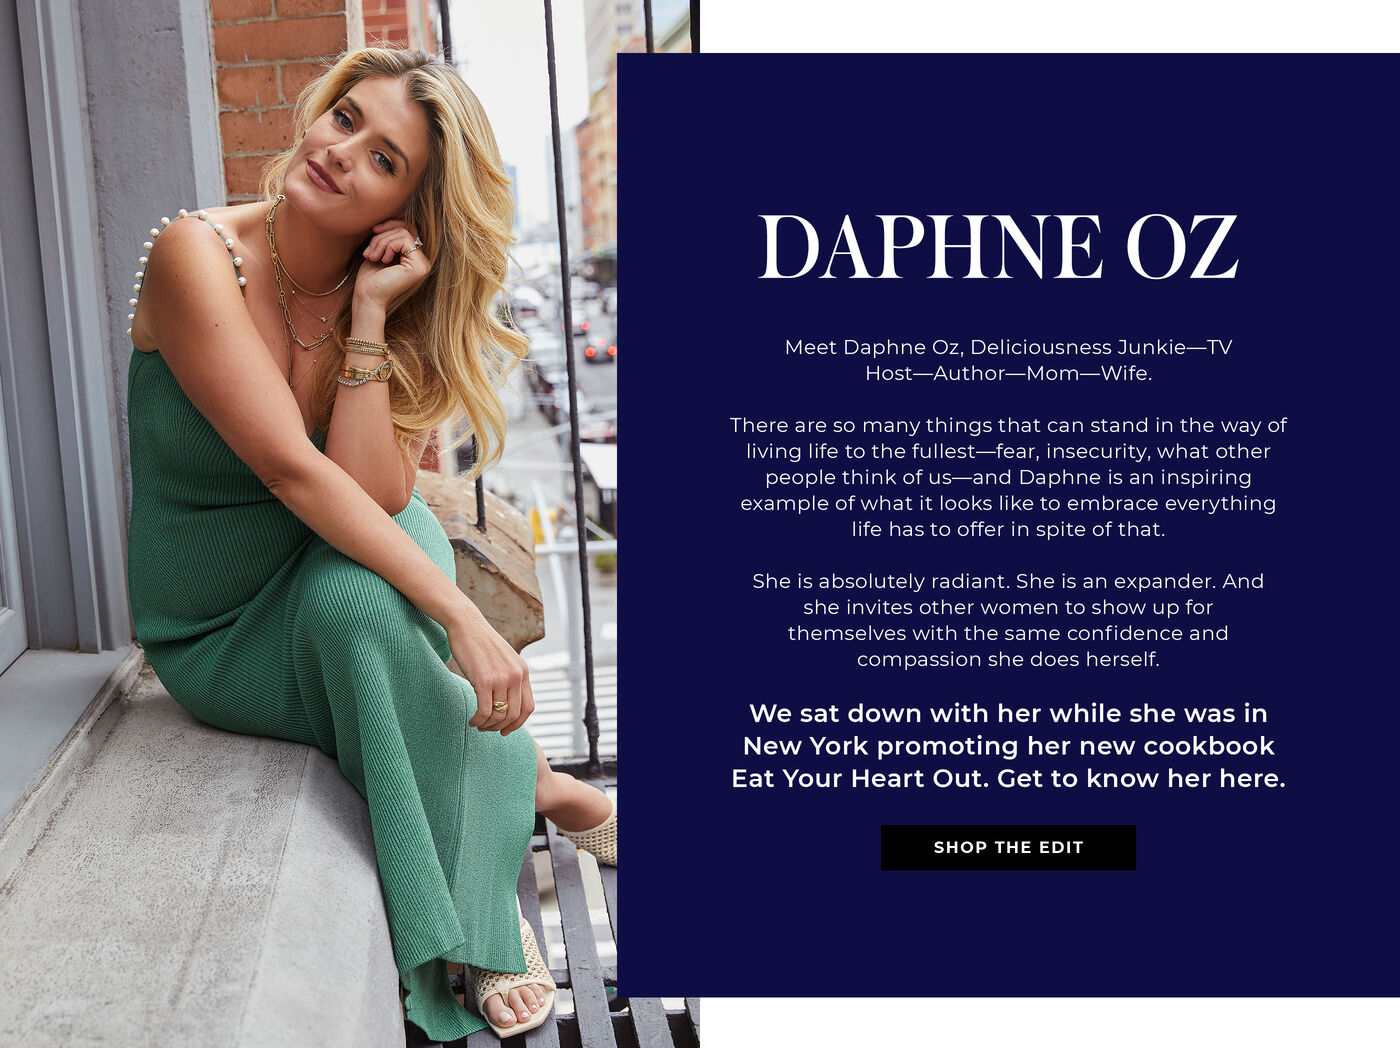 "DAPHNE OZ Meet Daphne Oz, Deliciousness Junkie—TV Host—Author—Mom—Wife.   There are so many things that can stand in the way of living life to the fullest—fear, insecurity, what other people think of us—and Daphne is an inspiring example of what it looks like to embrace everything life has to offer in spite of that.   She is absolutely radiant. She is an expander. And she invites other women to show up for themselves with the same confidence and compassion she does herself.   We sat down with her while she was in New York promoting her new cookbook Eat Your Heart Out.  Get to know her here."